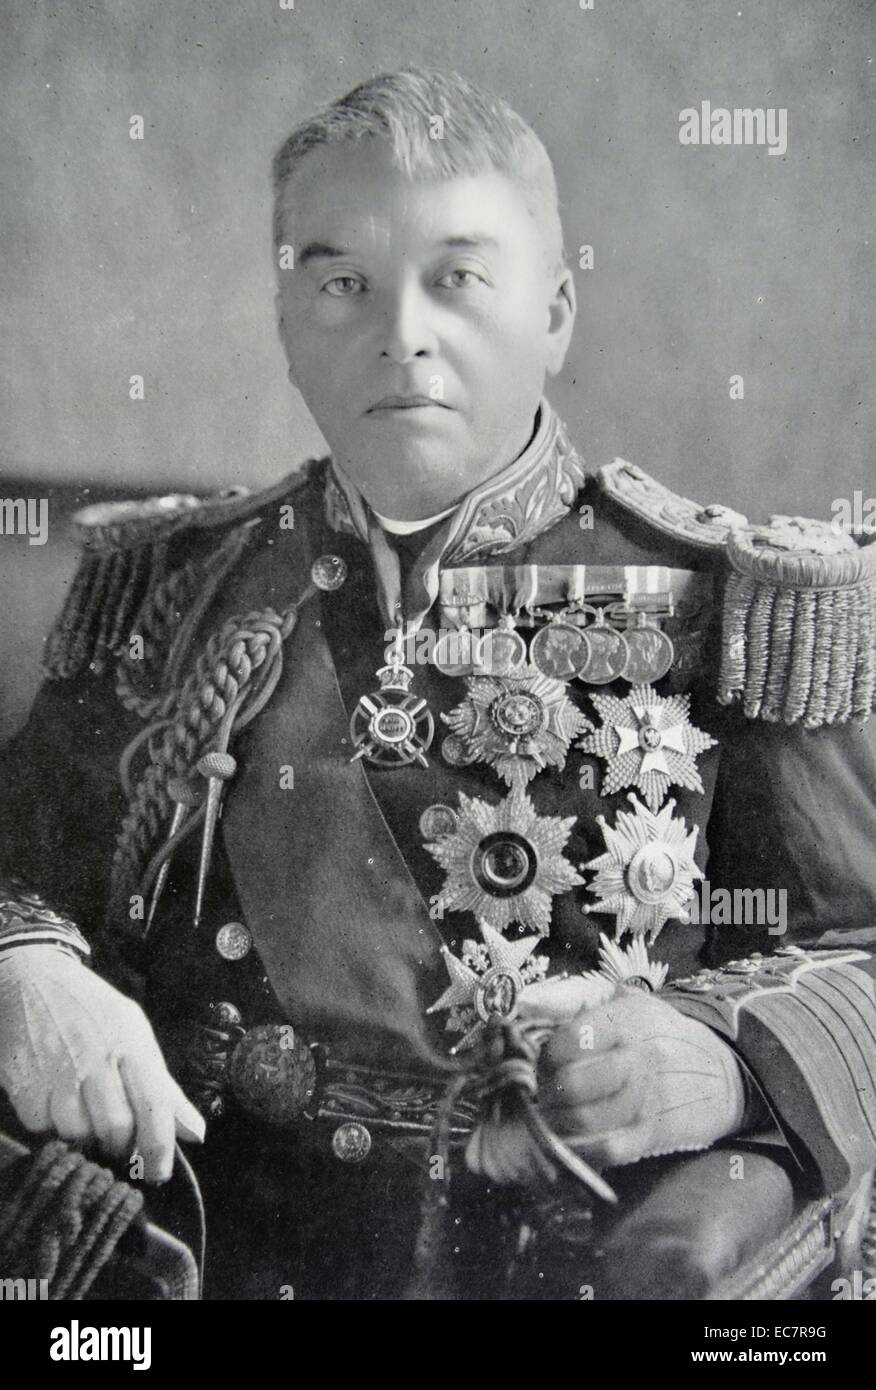 Admiral of the Fleet John Fisher, 1st Baron Fisher, (25 January 1841–10 July 1920)  British admiral known for his efforts at naval reform. Stock Photo